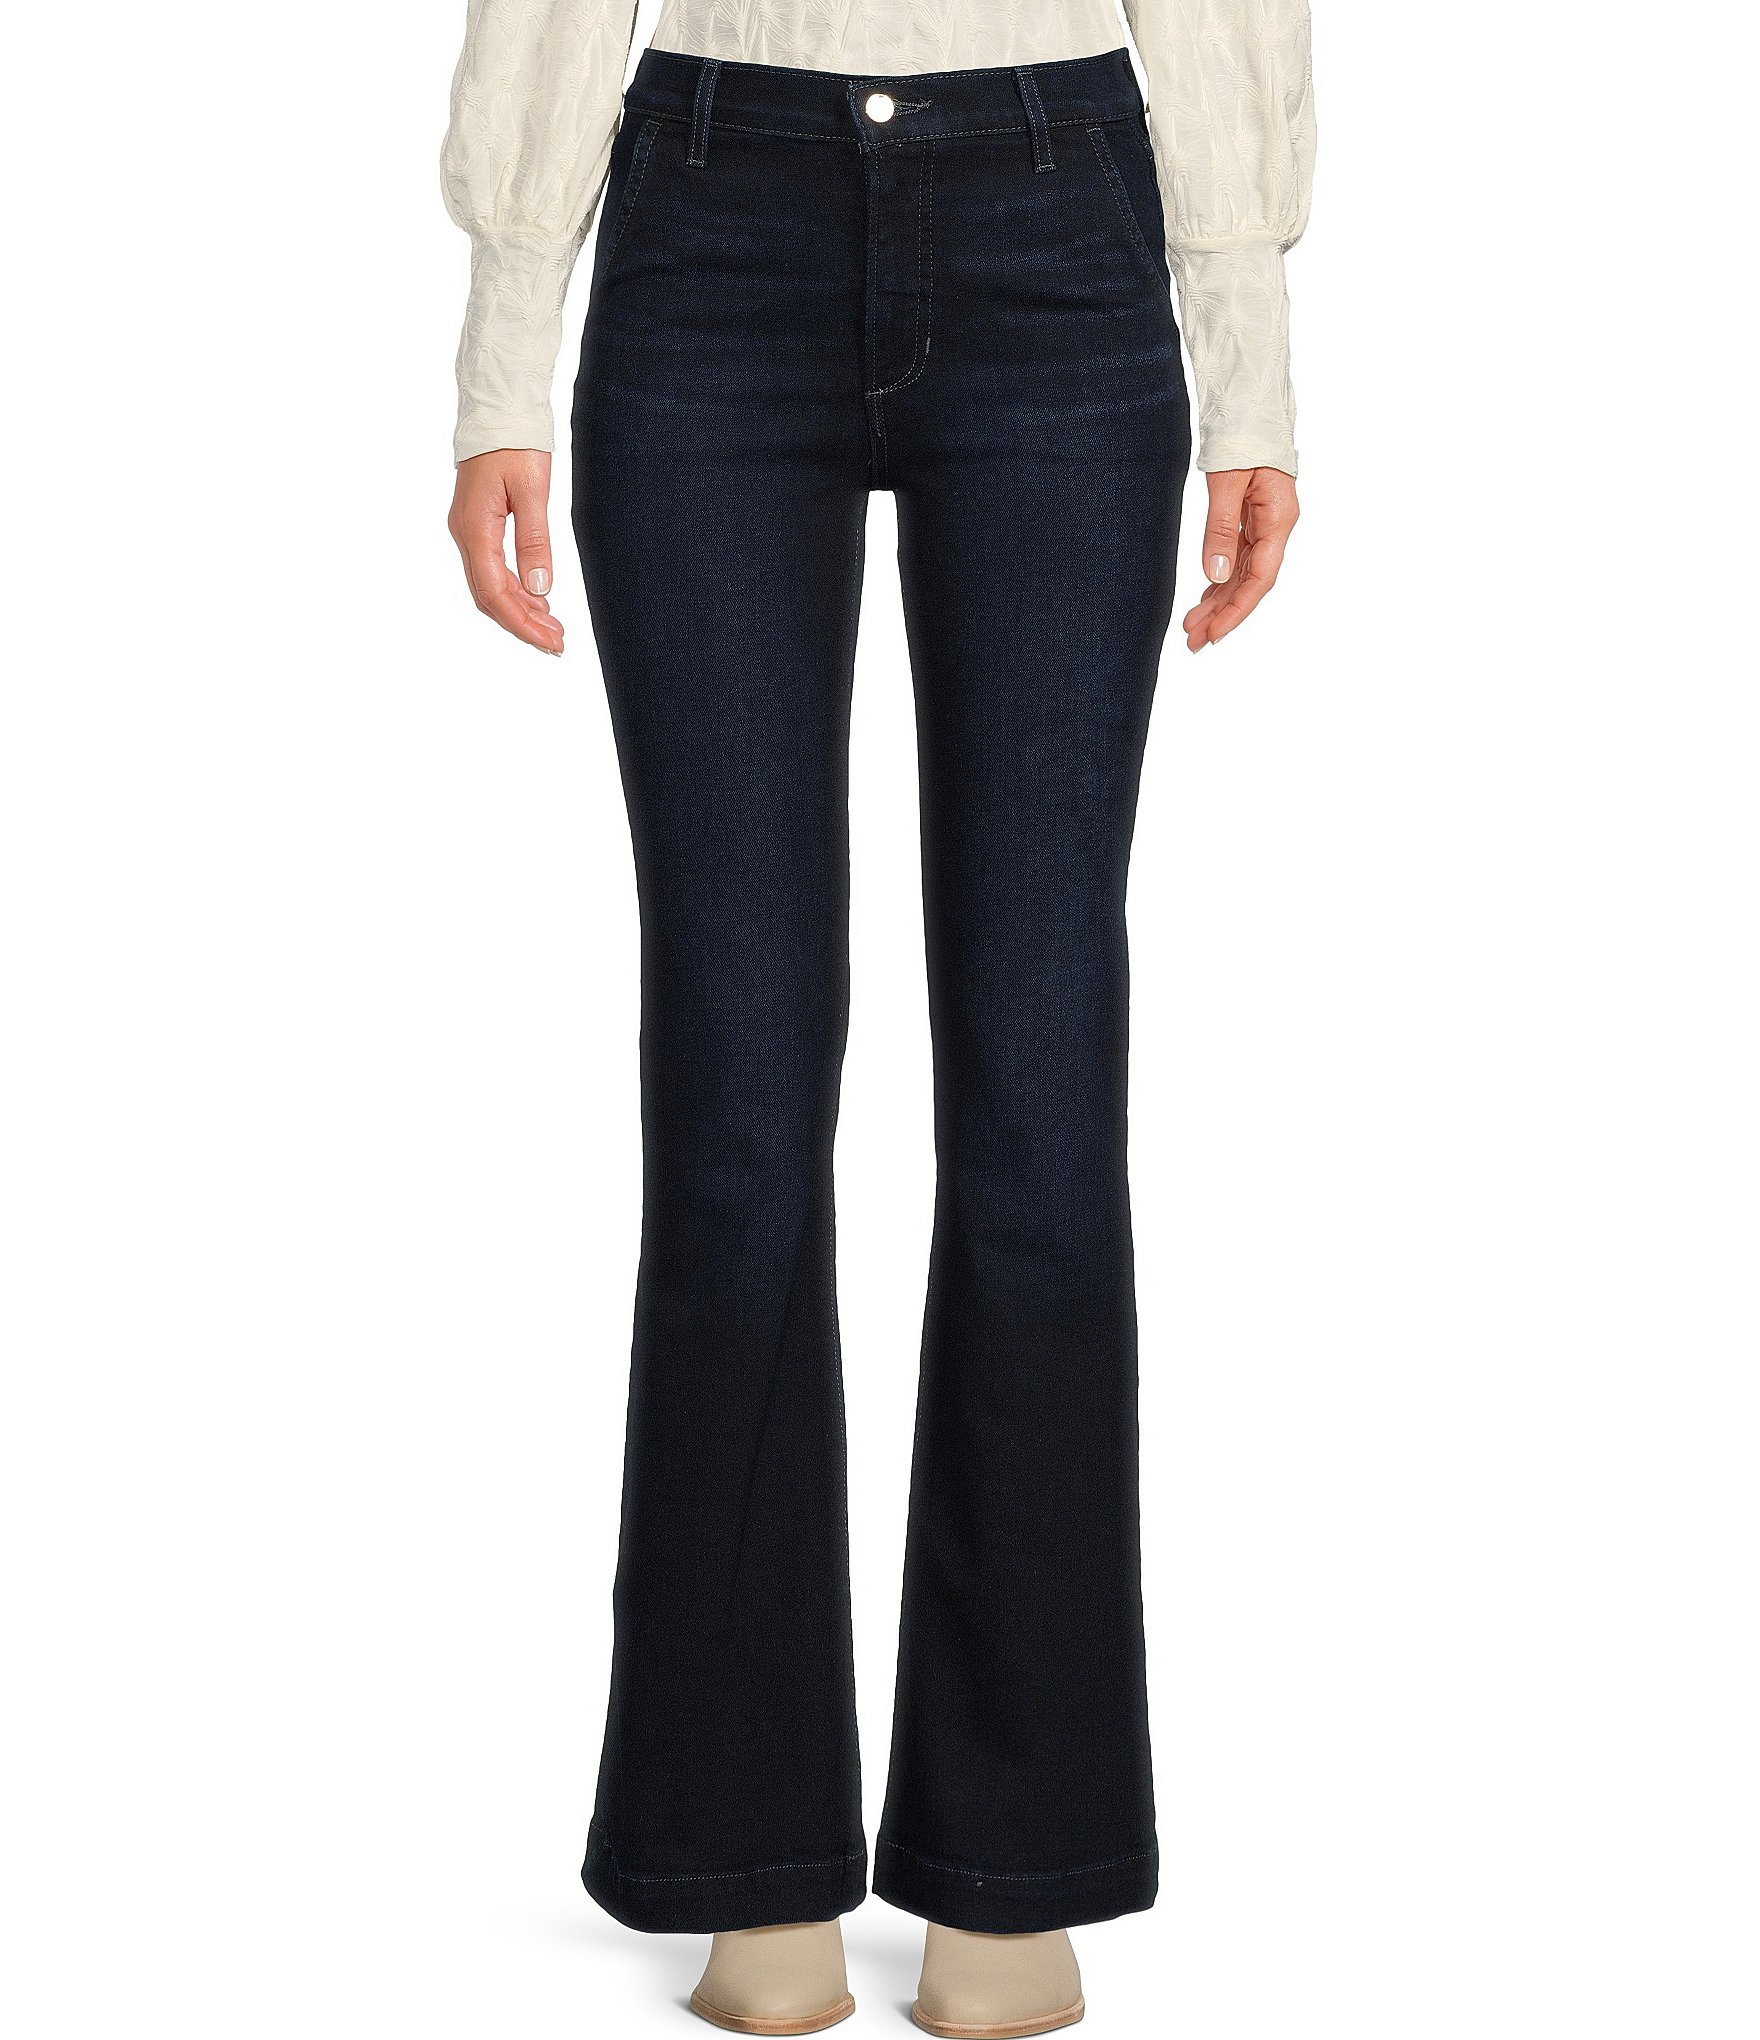 Joe's Jeans The Molly High Rise Flare Leg Jeans in Everyday